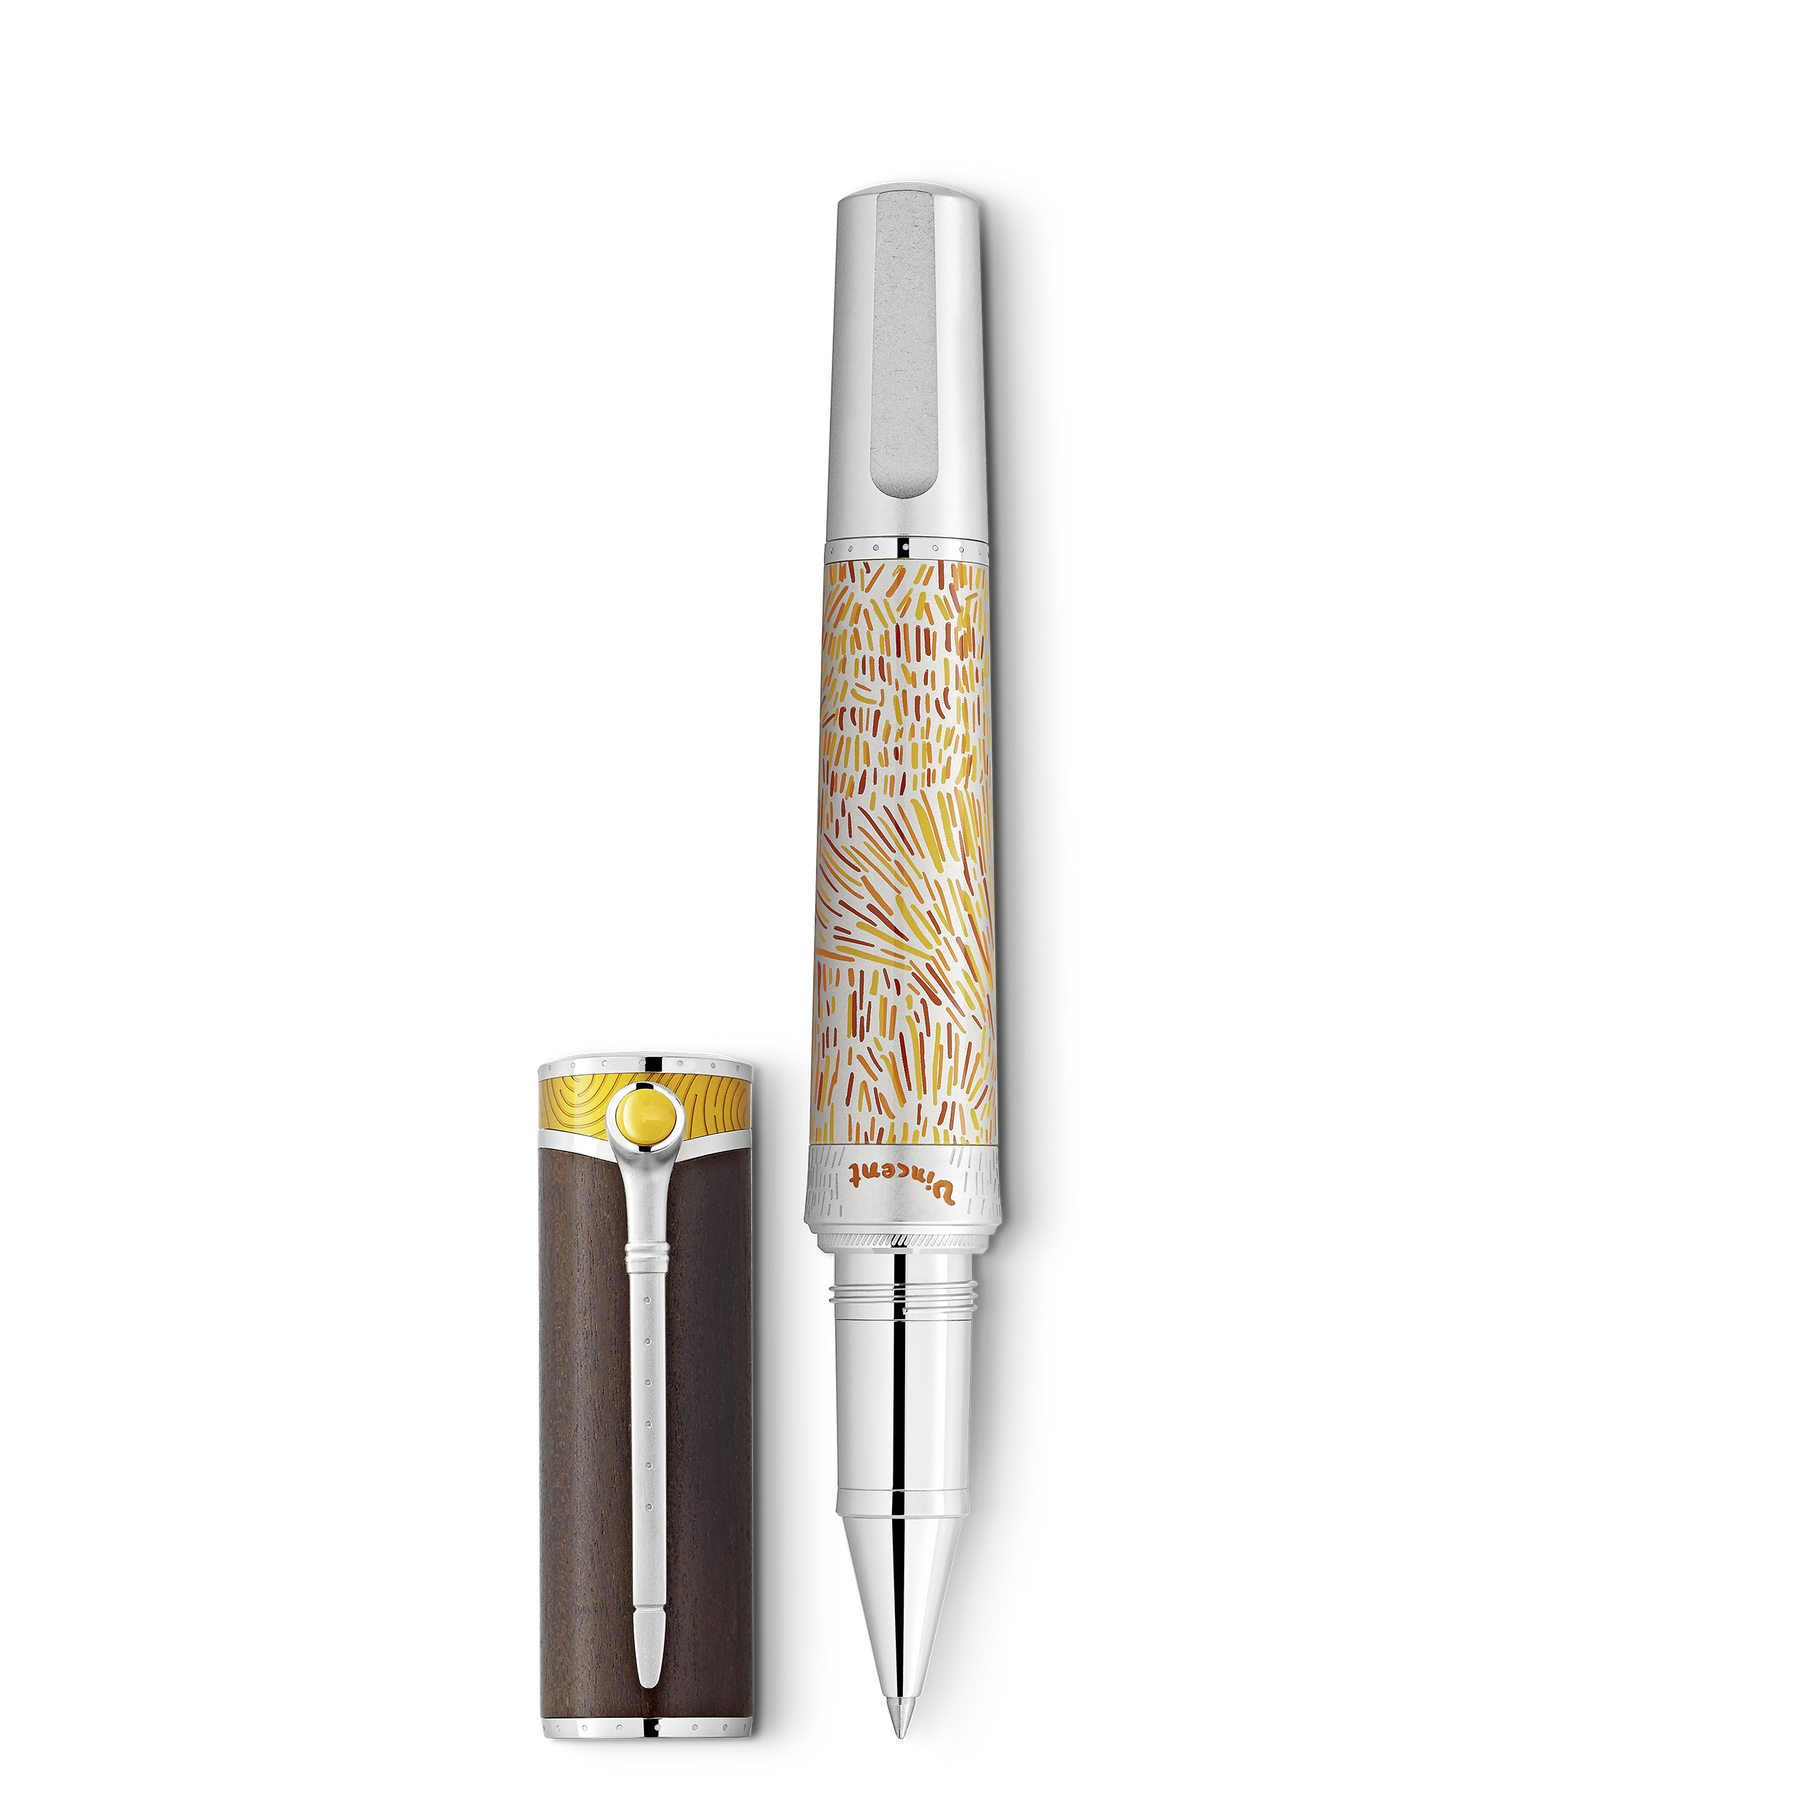 Masters of Art Homage to Vincent van Gogh Limited Edition 4810 Rollerball